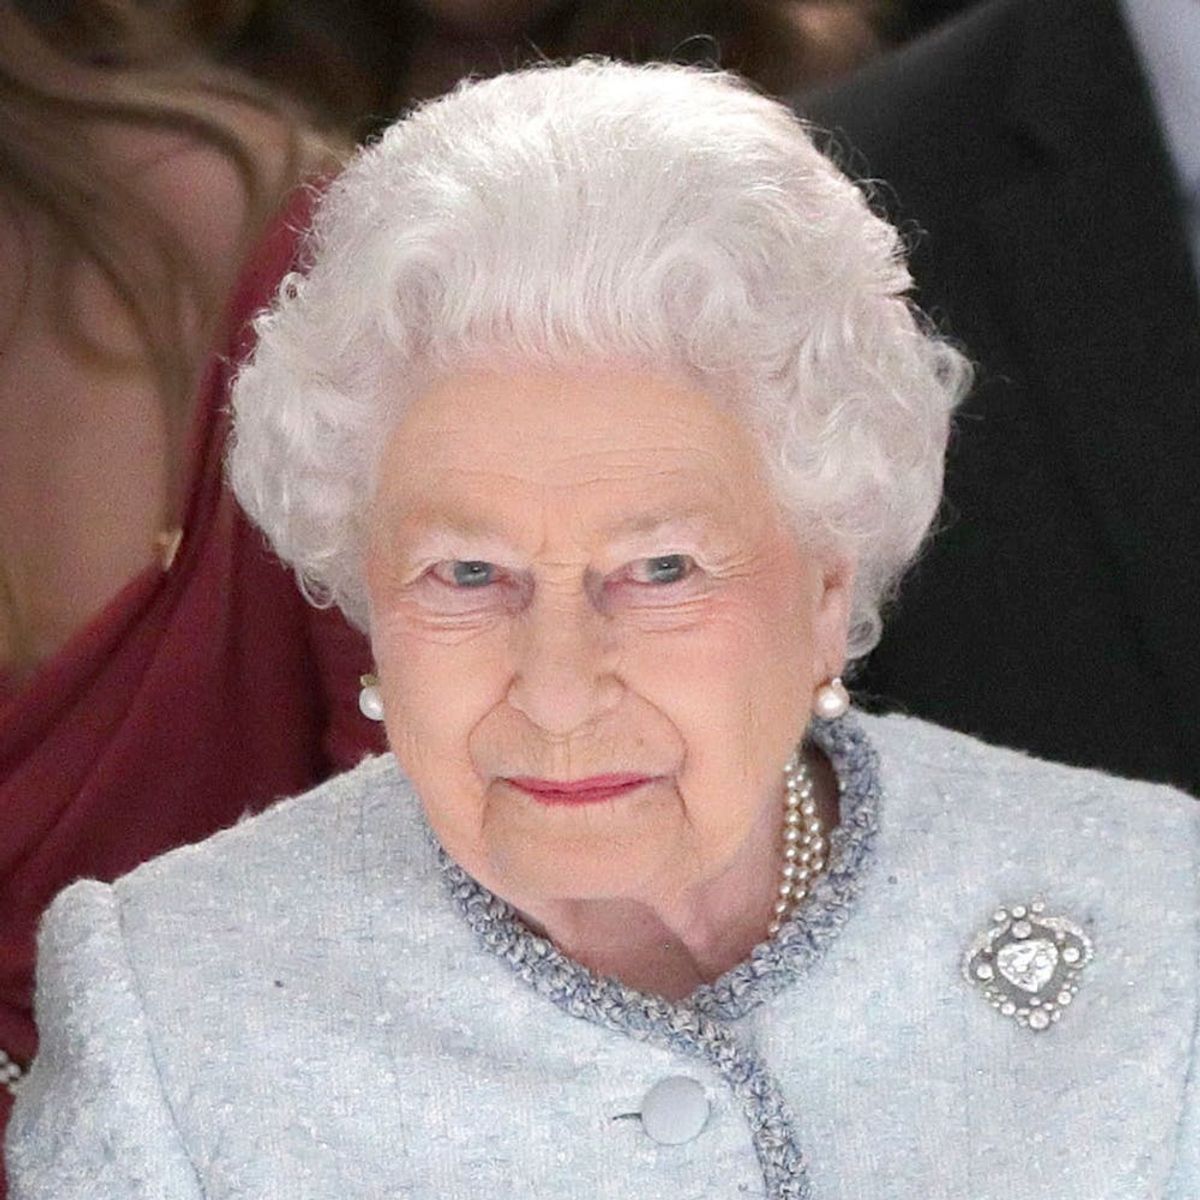 Queen Elizabeth II Made a Surprise Appearance at London Fashion Week Next to Anna Wintour!